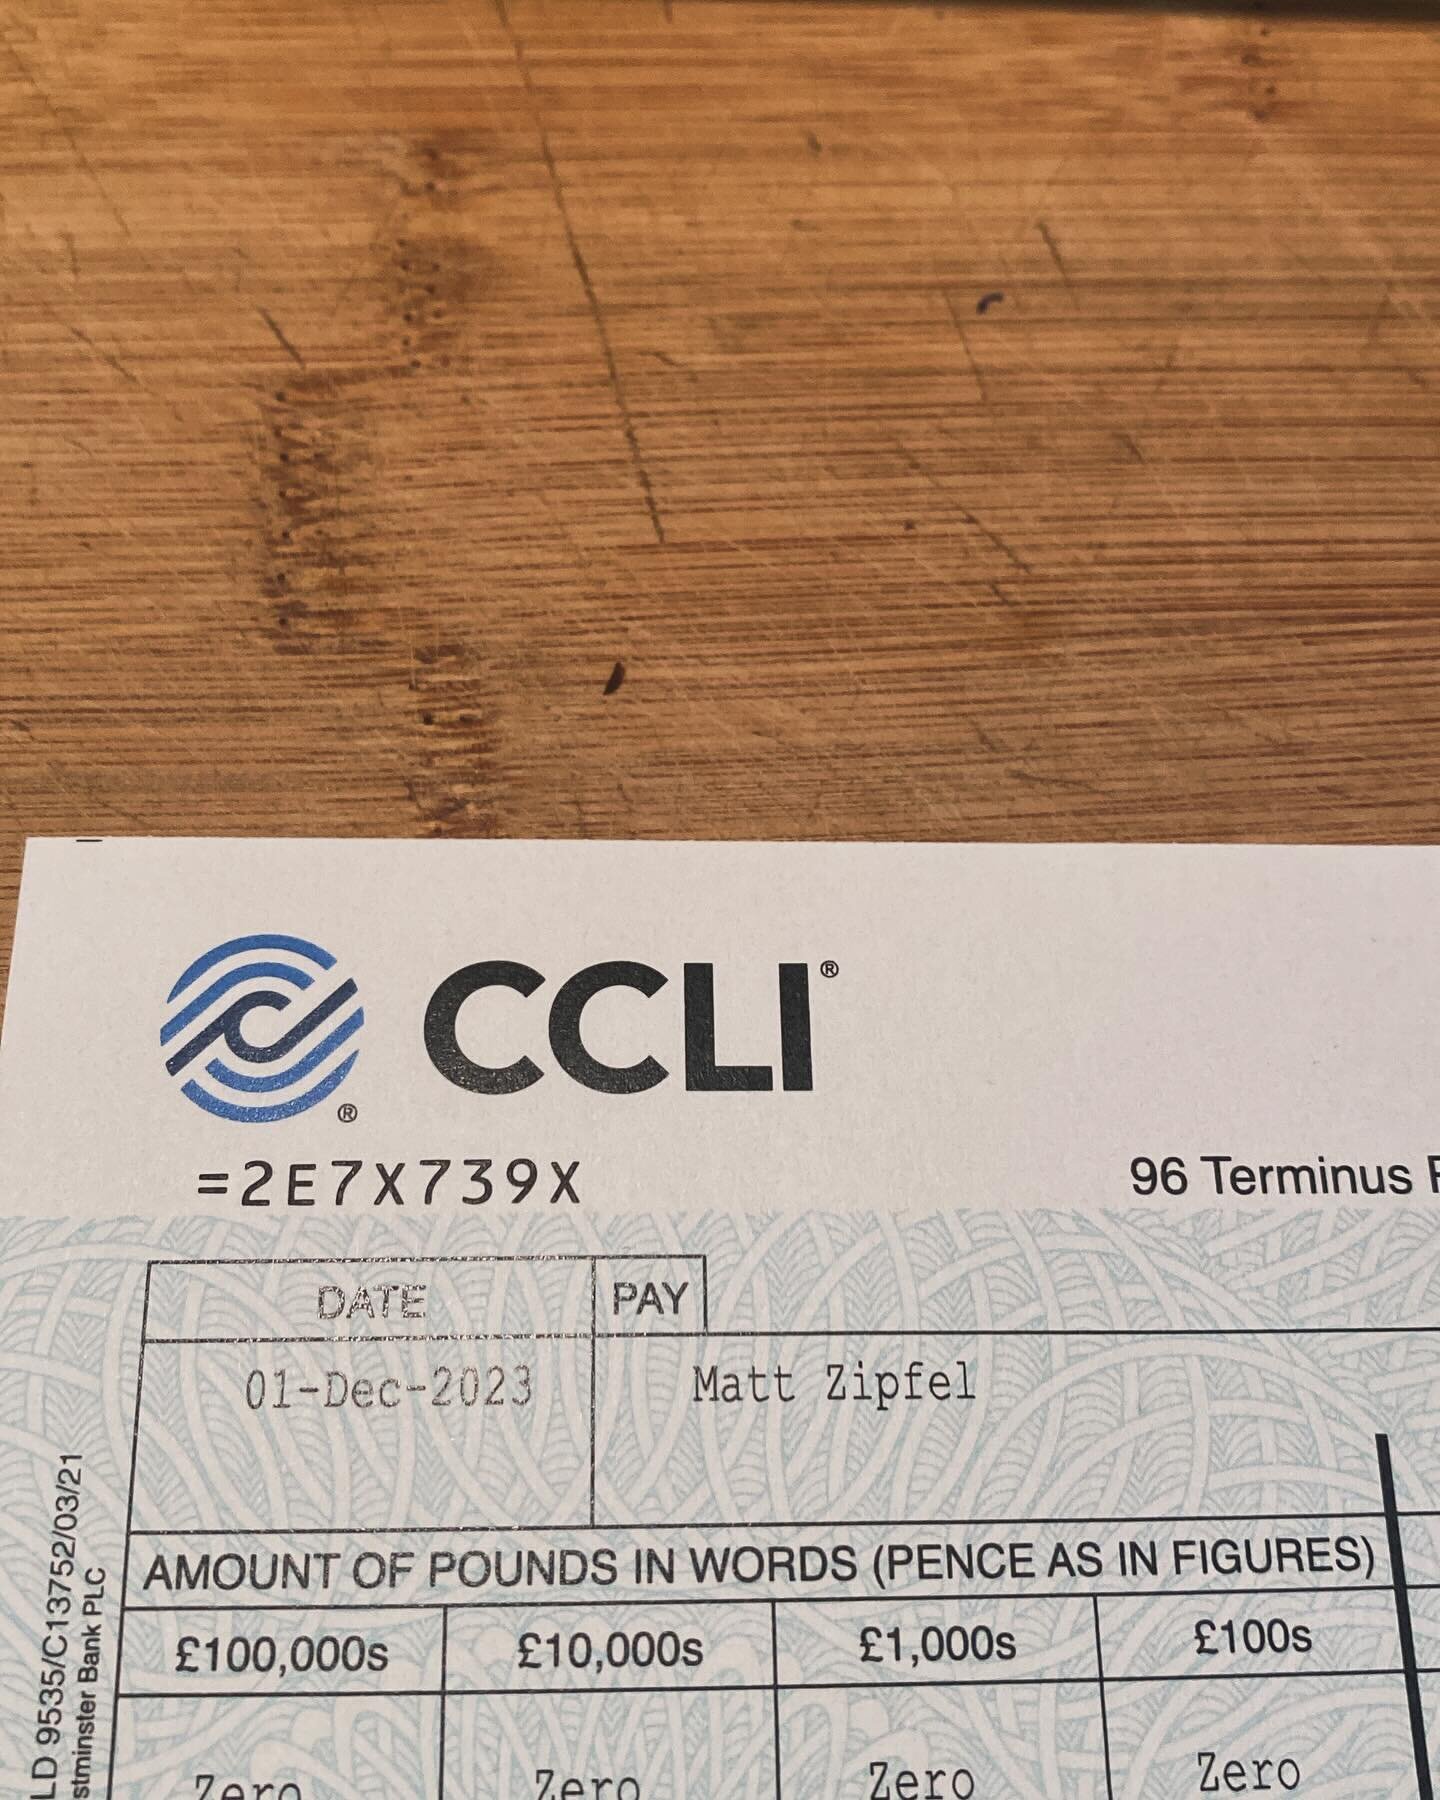 I don&rsquo;t write songs for the money, I do it because I like that people connect with the songs I write/have written or find that they express what they inwardly want to express but find difficult. It is nice to finally receive a cheque though as 